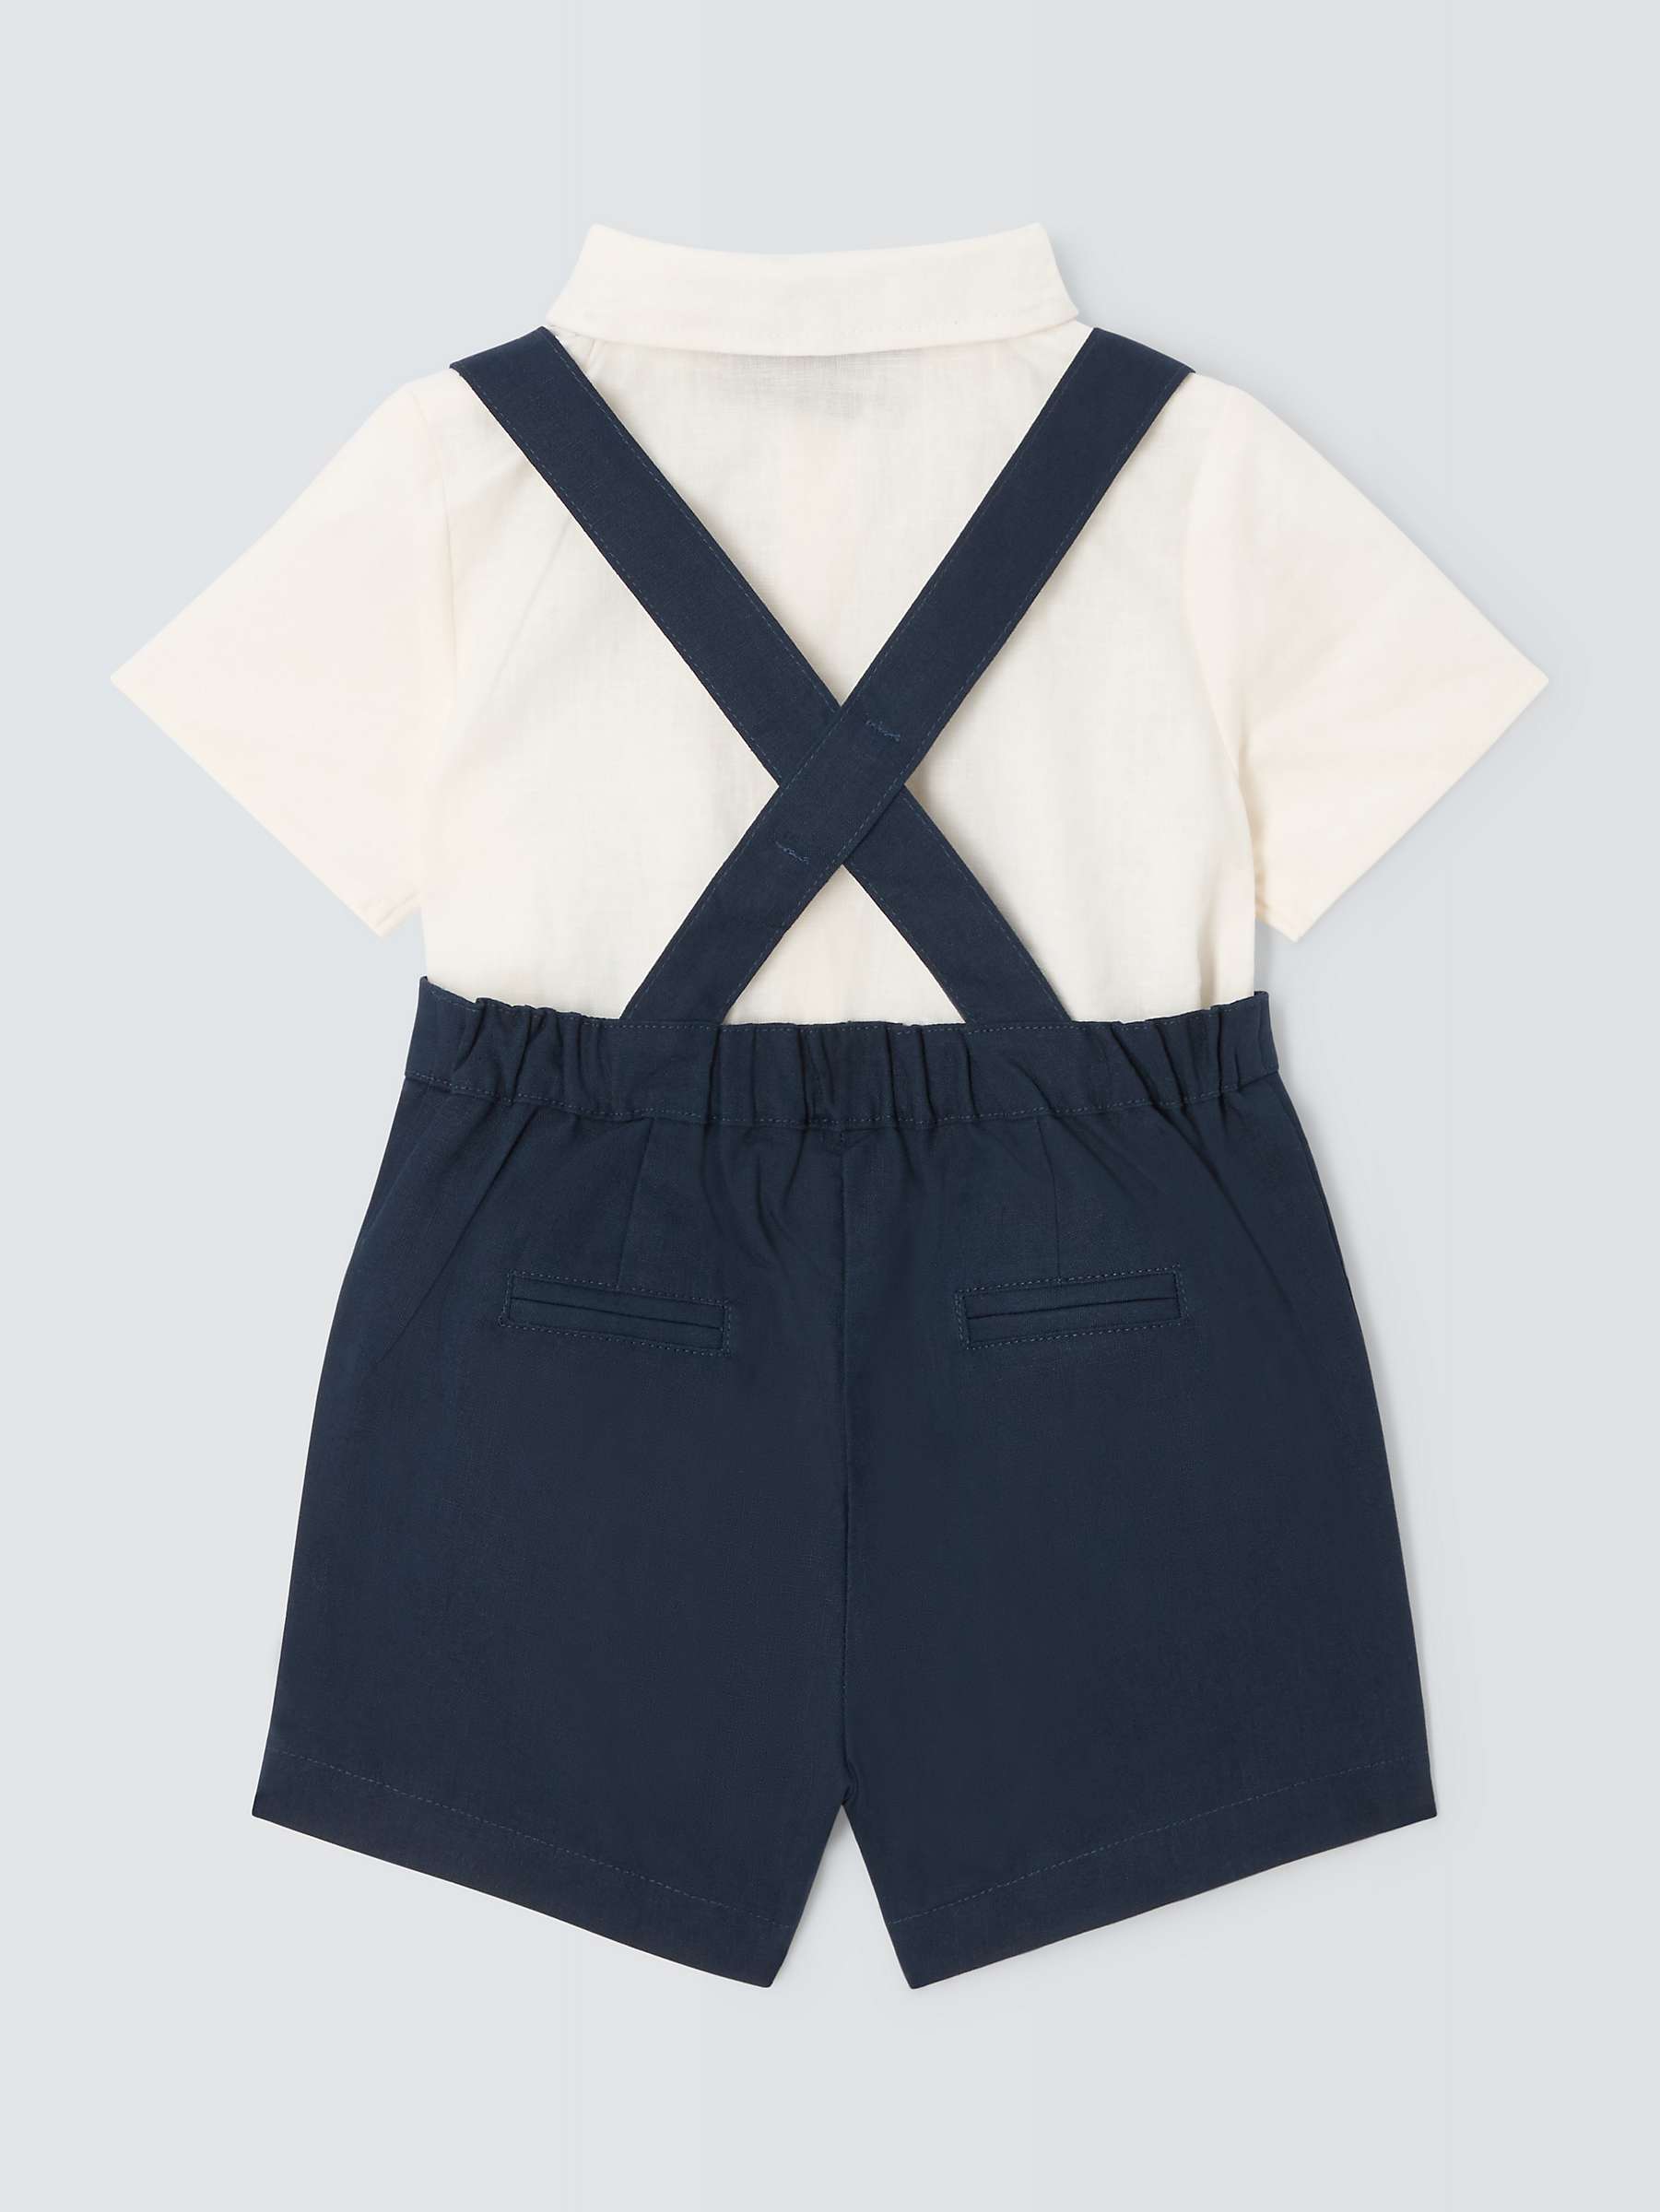 Buy John Lewis Heirloom Collection Baby Bodysuit, Shorts & Bow Tie, Set of 3, Navy Online at johnlewis.com